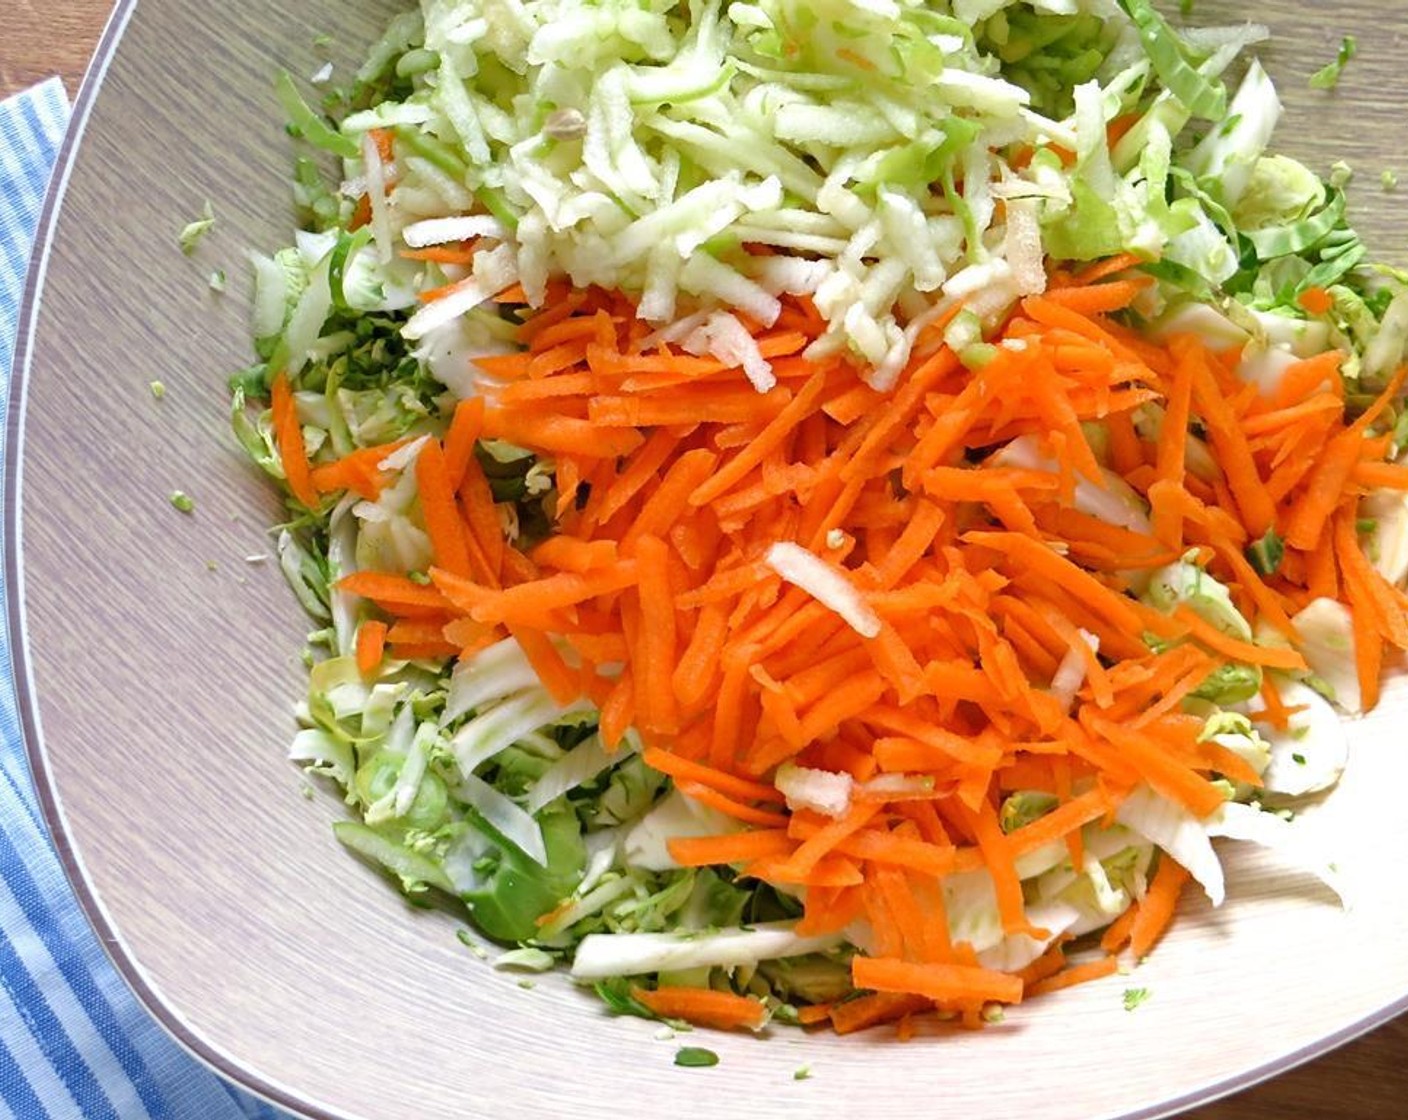 step 6 Combine the shredded Brussels sprouts, Granny Smith Apple (1), Carrot (1) and fennel in a large bowl. Add a squeeze of Lemons (to taste) and toss to combine.